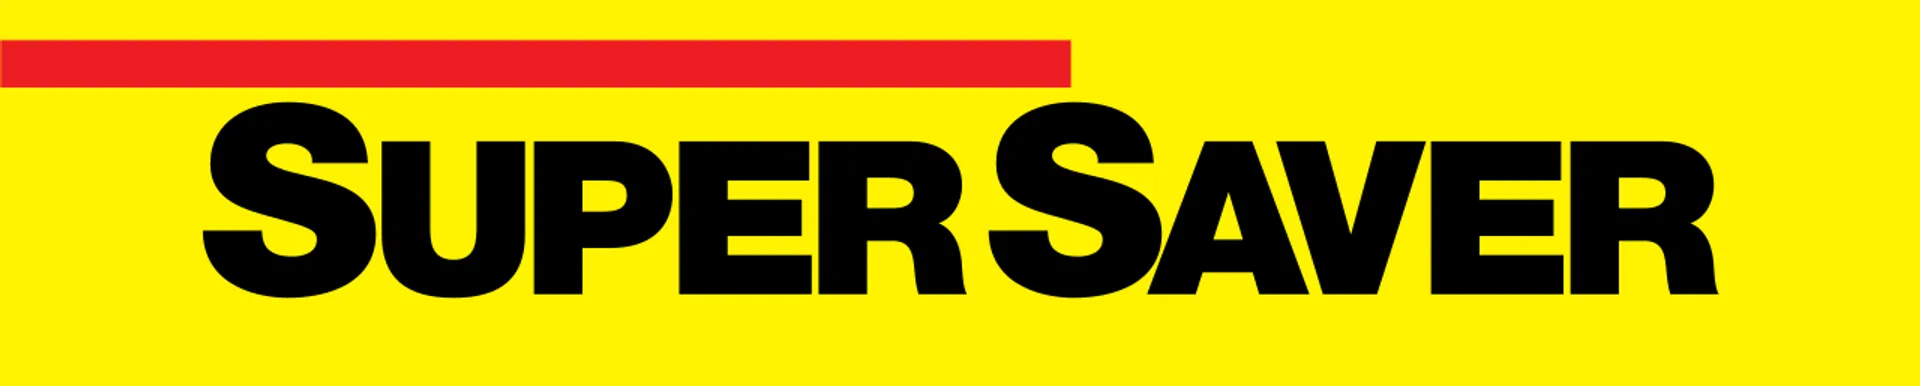 SUPER SAVER logo current weekly ad